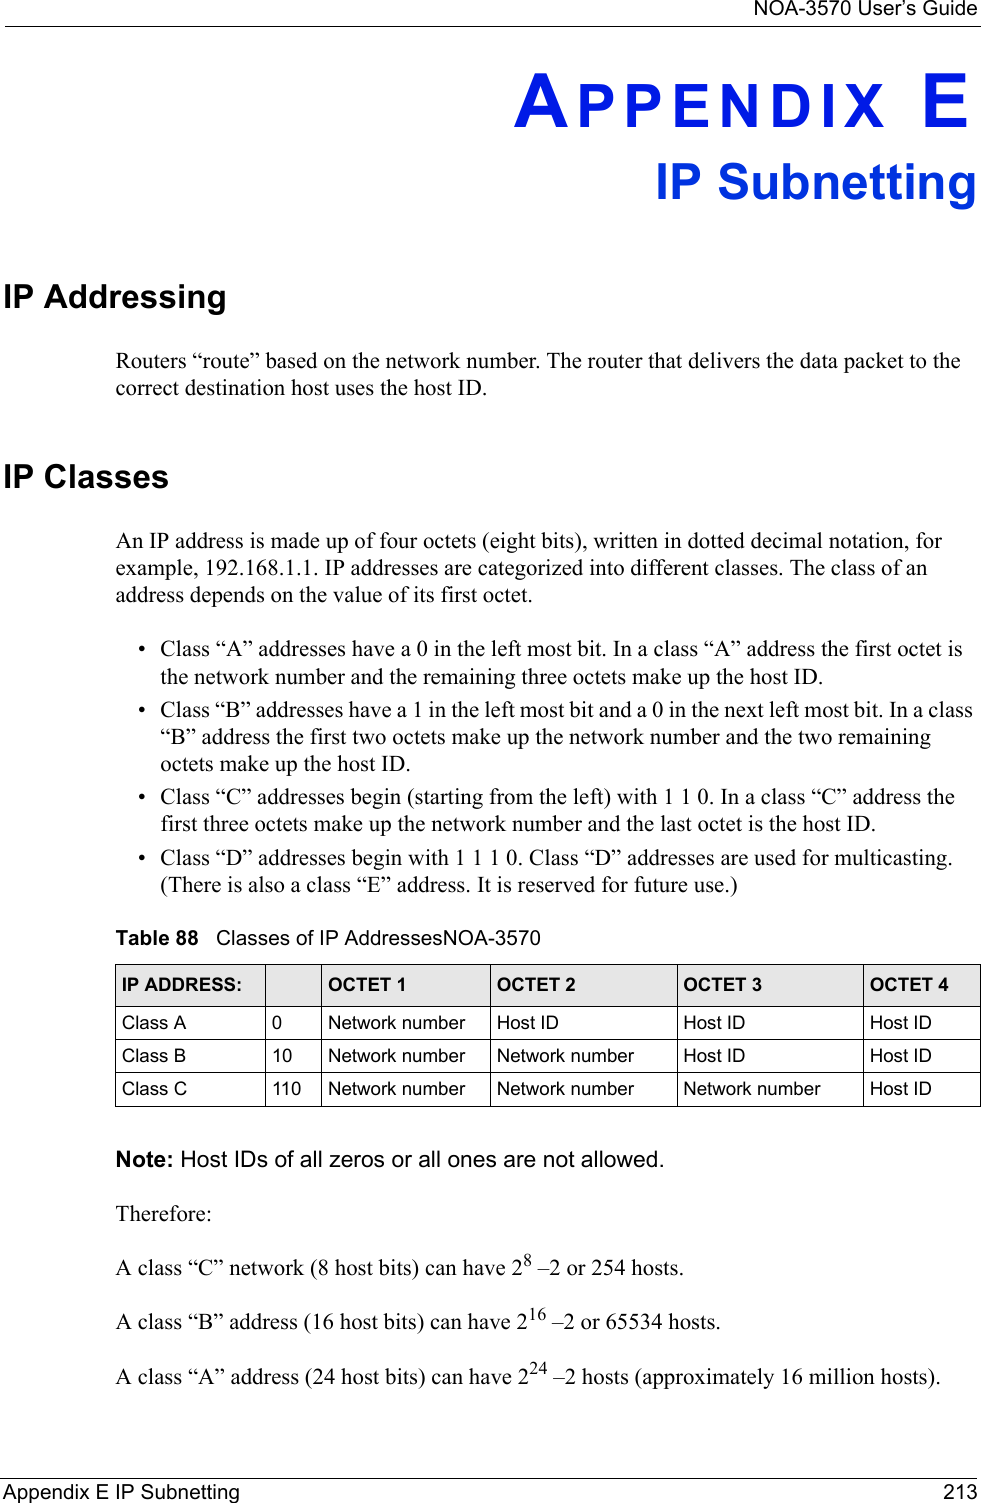 NOA-3570 User’s GuideAppendix E IP Subnetting 213APPENDIX EIP SubnettingIP Addressing Routers “route” based on the network number. The router that delivers the data packet to the correct destination host uses the host ID. IP ClassesAn IP address is made up of four octets (eight bits), written in dotted decimal notation, for example, 192.168.1.1. IP addresses are categorized into different classes. The class of an address depends on the value of its first octet. • Class “A” addresses have a 0 in the left most bit. In a class “A” address the first octet is the network number and the remaining three octets make up the host ID.• Class “B” addresses have a 1 in the left most bit and a 0 in the next left most bit. In a class “B” address the first two octets make up the network number and the two remaining octets make up the host ID.• Class “C” addresses begin (starting from the left) with 1 1 0. In a class “C” address the first three octets make up the network number and the last octet is the host ID.• Class “D” addresses begin with 1 1 1 0. Class “D” addresses are used for multicasting. (There is also a class “E” address. It is reserved for future use.) Note: Host IDs of all zeros or all ones are not allowed.Therefore:A class “C” network (8 host bits) can have 28 –2 or 254 hosts. A class “B” address (16 host bits) can have 216 –2 or 65534 hosts. A class “A” address (24 host bits) can have 224 –2 hosts (approximately 16 million hosts). Table 88   Classes of IP AddressesNOA-3570IP ADDRESS: OCTET 1 OCTET 2 OCTET 3 OCTET 4Class A 0Network number Host ID Host ID Host IDClass B 10 Network number Network number Host ID Host IDClass C 110 Network number Network number Network number Host ID